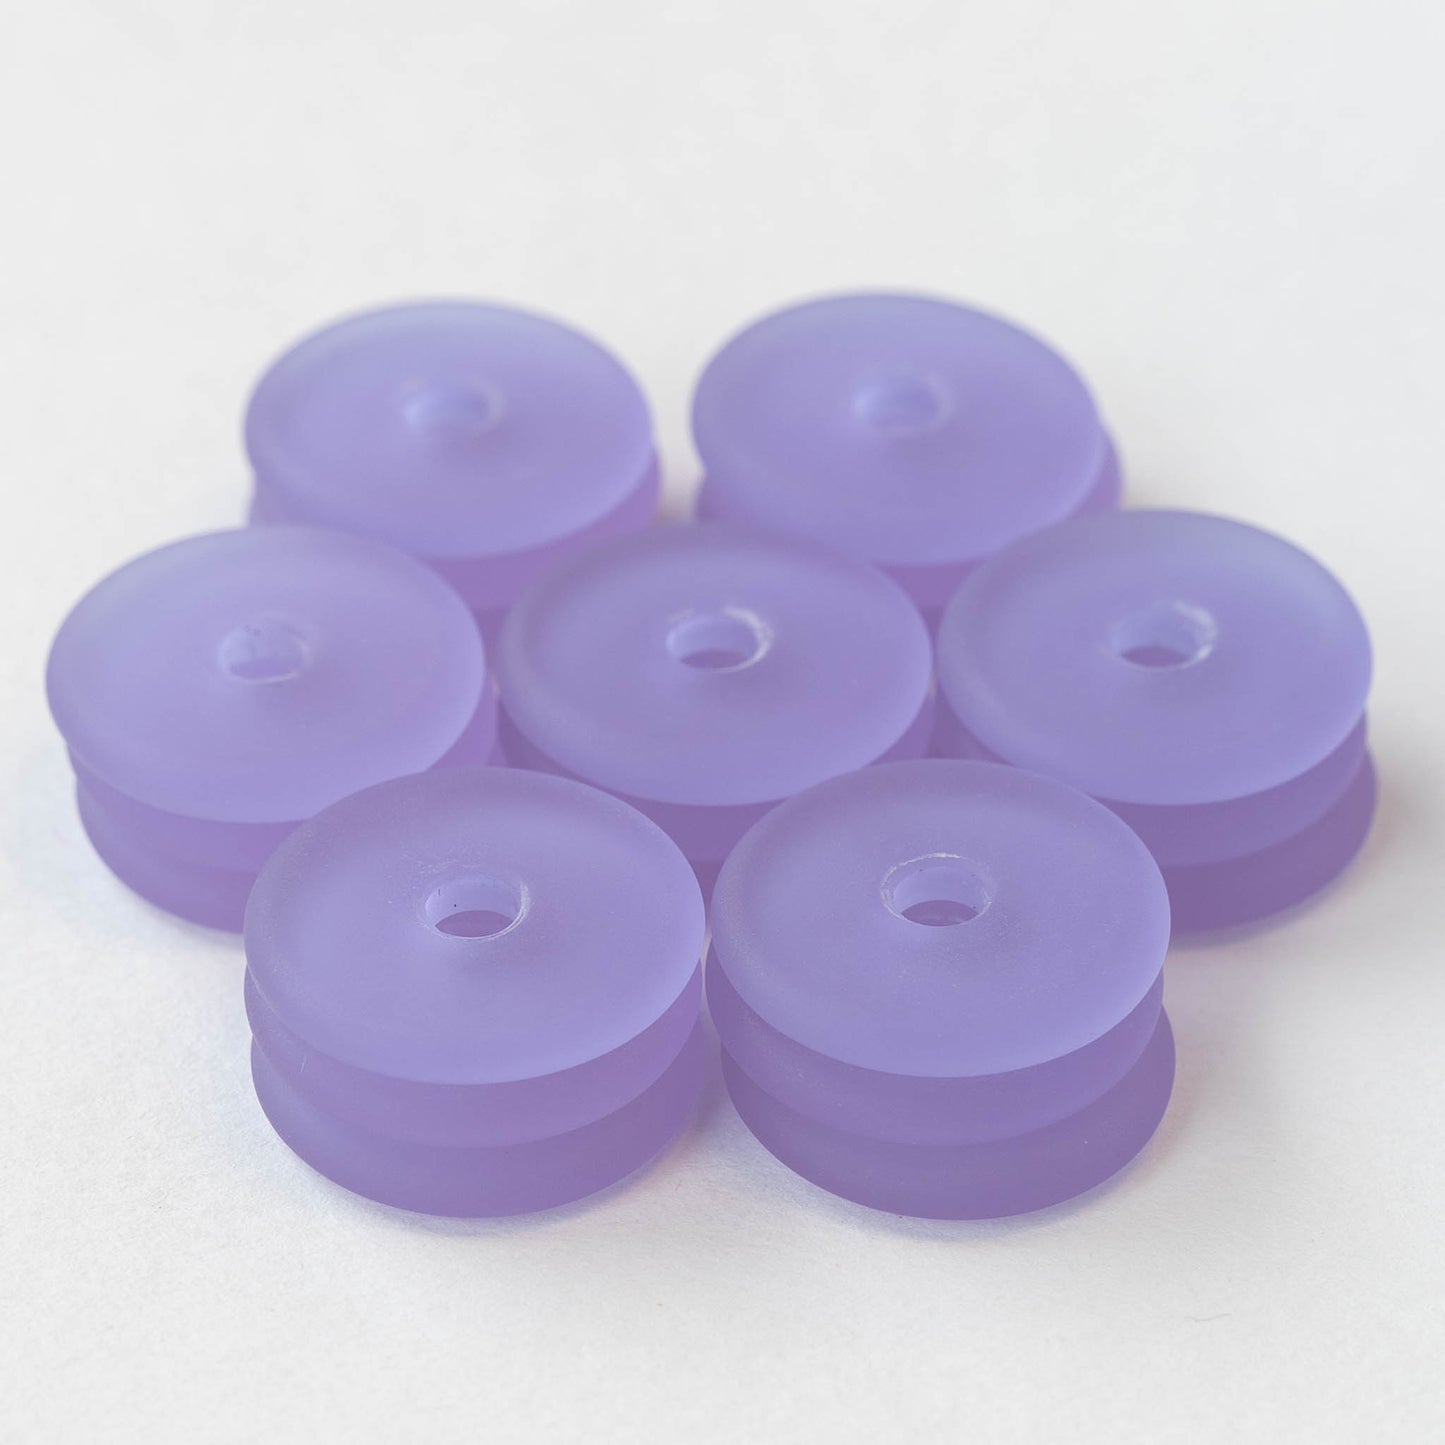 25mm Frosted Glass Donut - Lavender- 4 Beads